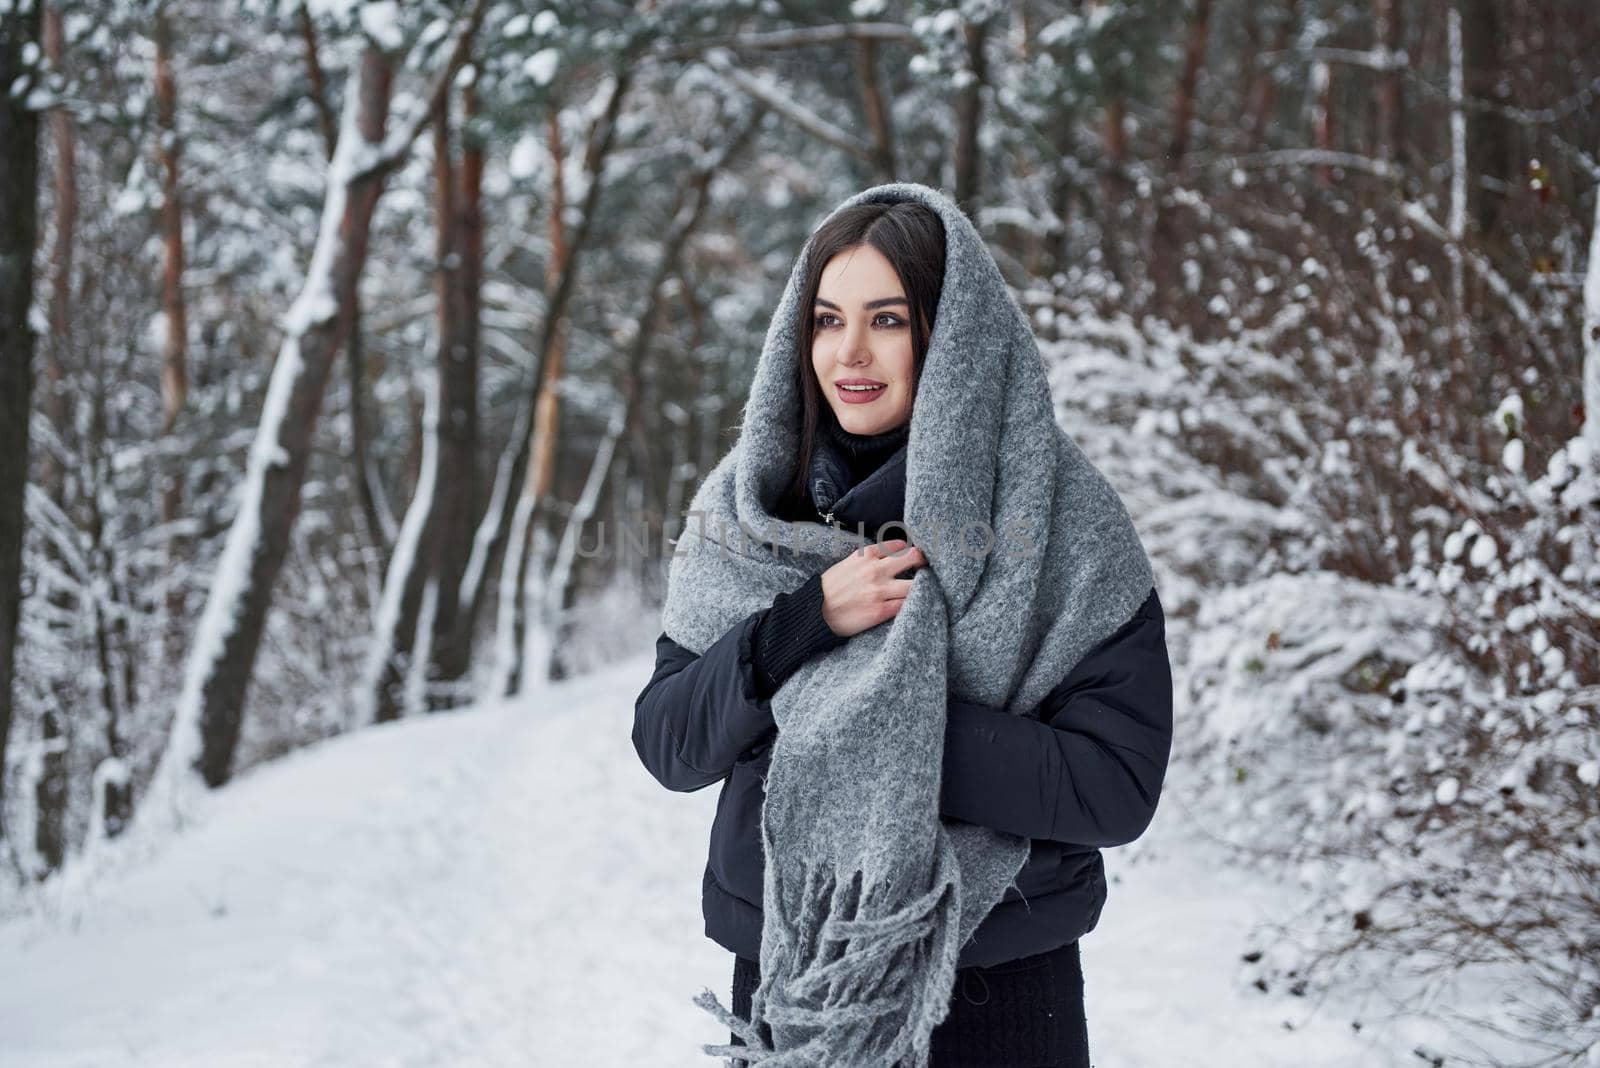 Winter is charming. Portrait of charming woman in the black jacket and grey scarf in the snowy cold forest by Standret